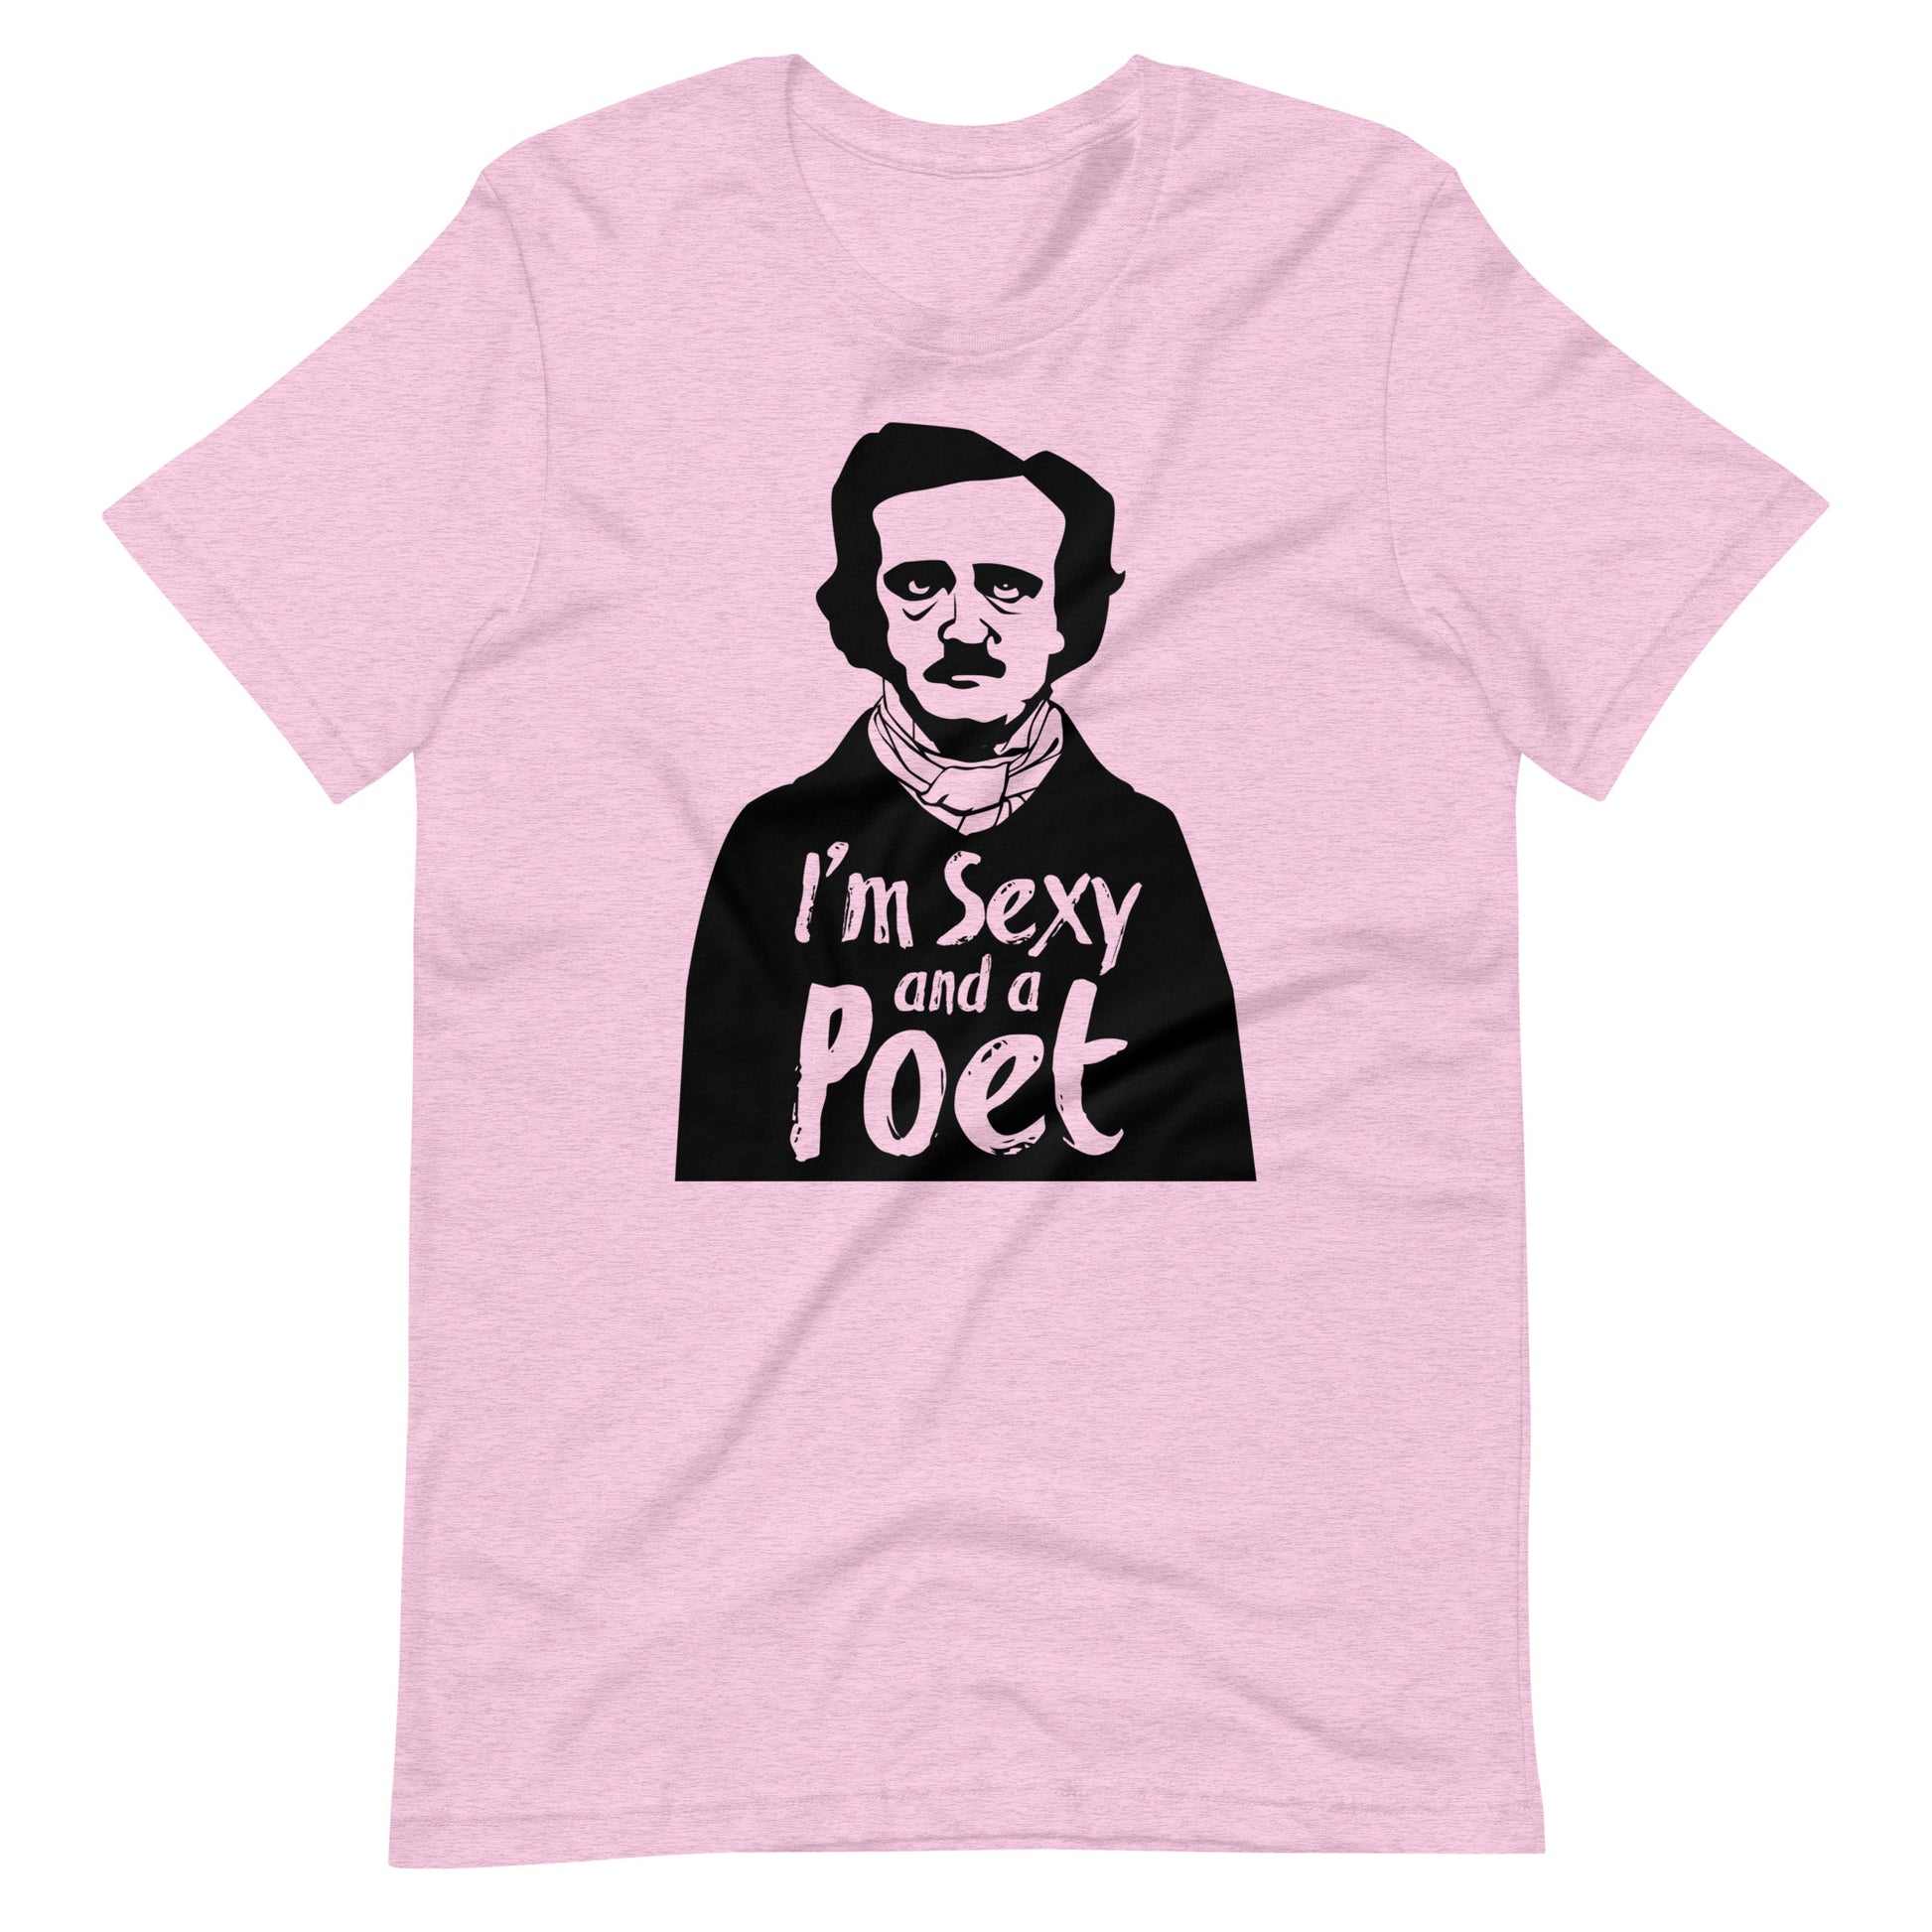 Women's Edgar Allan Poe "I'm Sexy and a Poet" t-shirt - Heather Prism Lilac Front